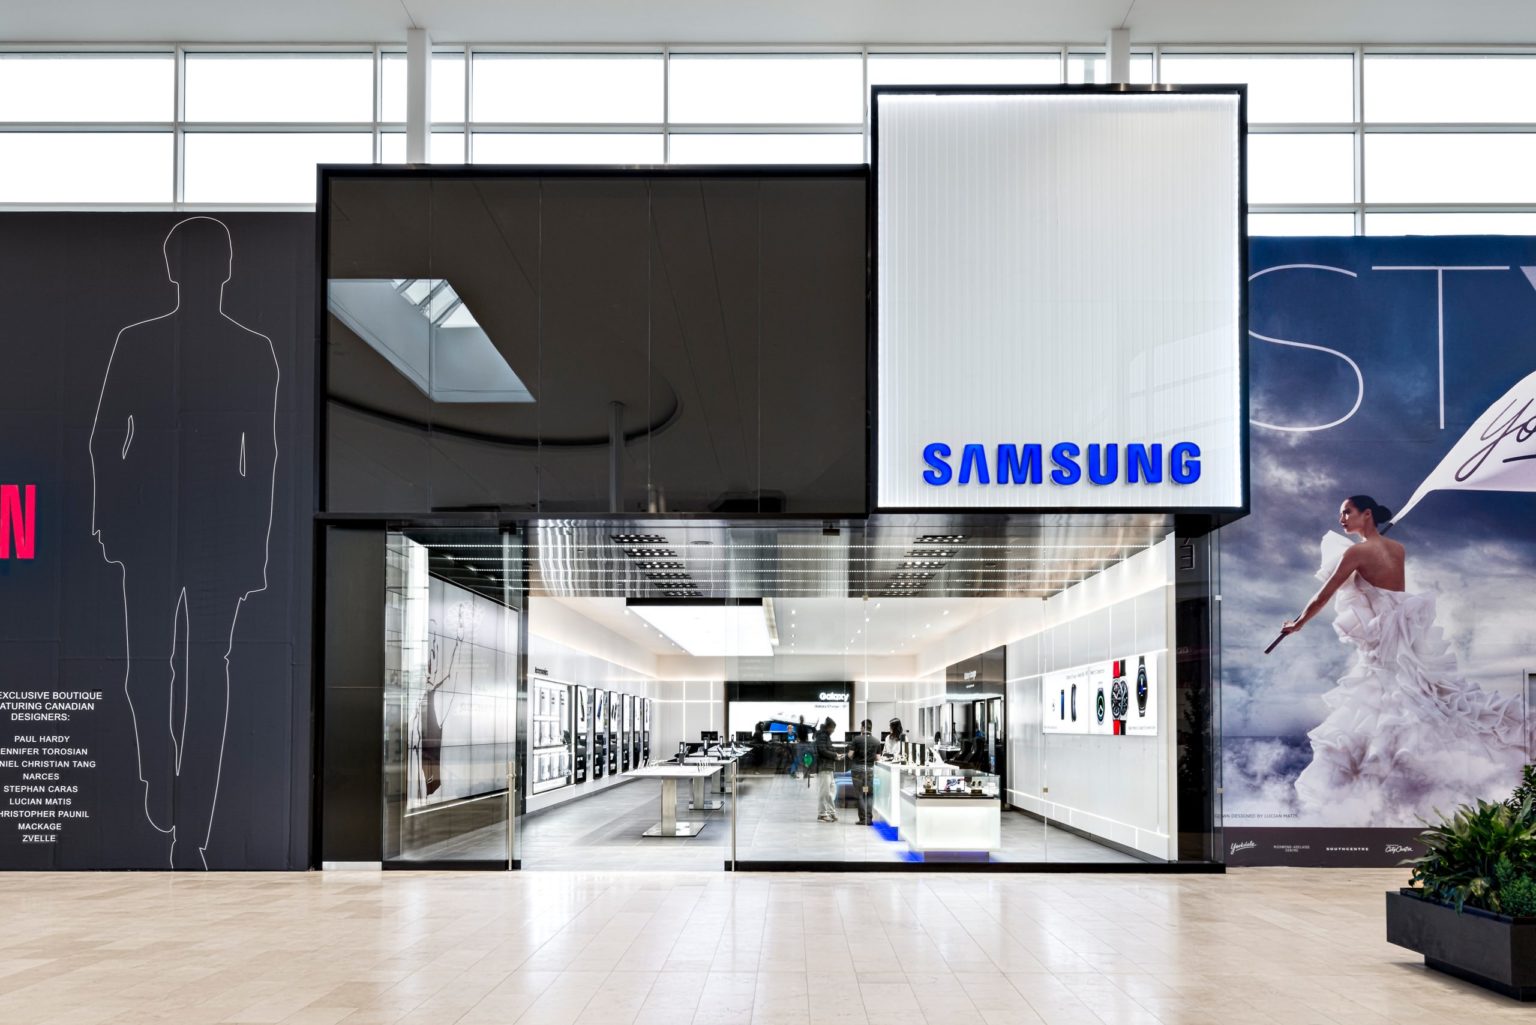 Samsung Yorkdale  in Toronto ON Canada, by Cutler